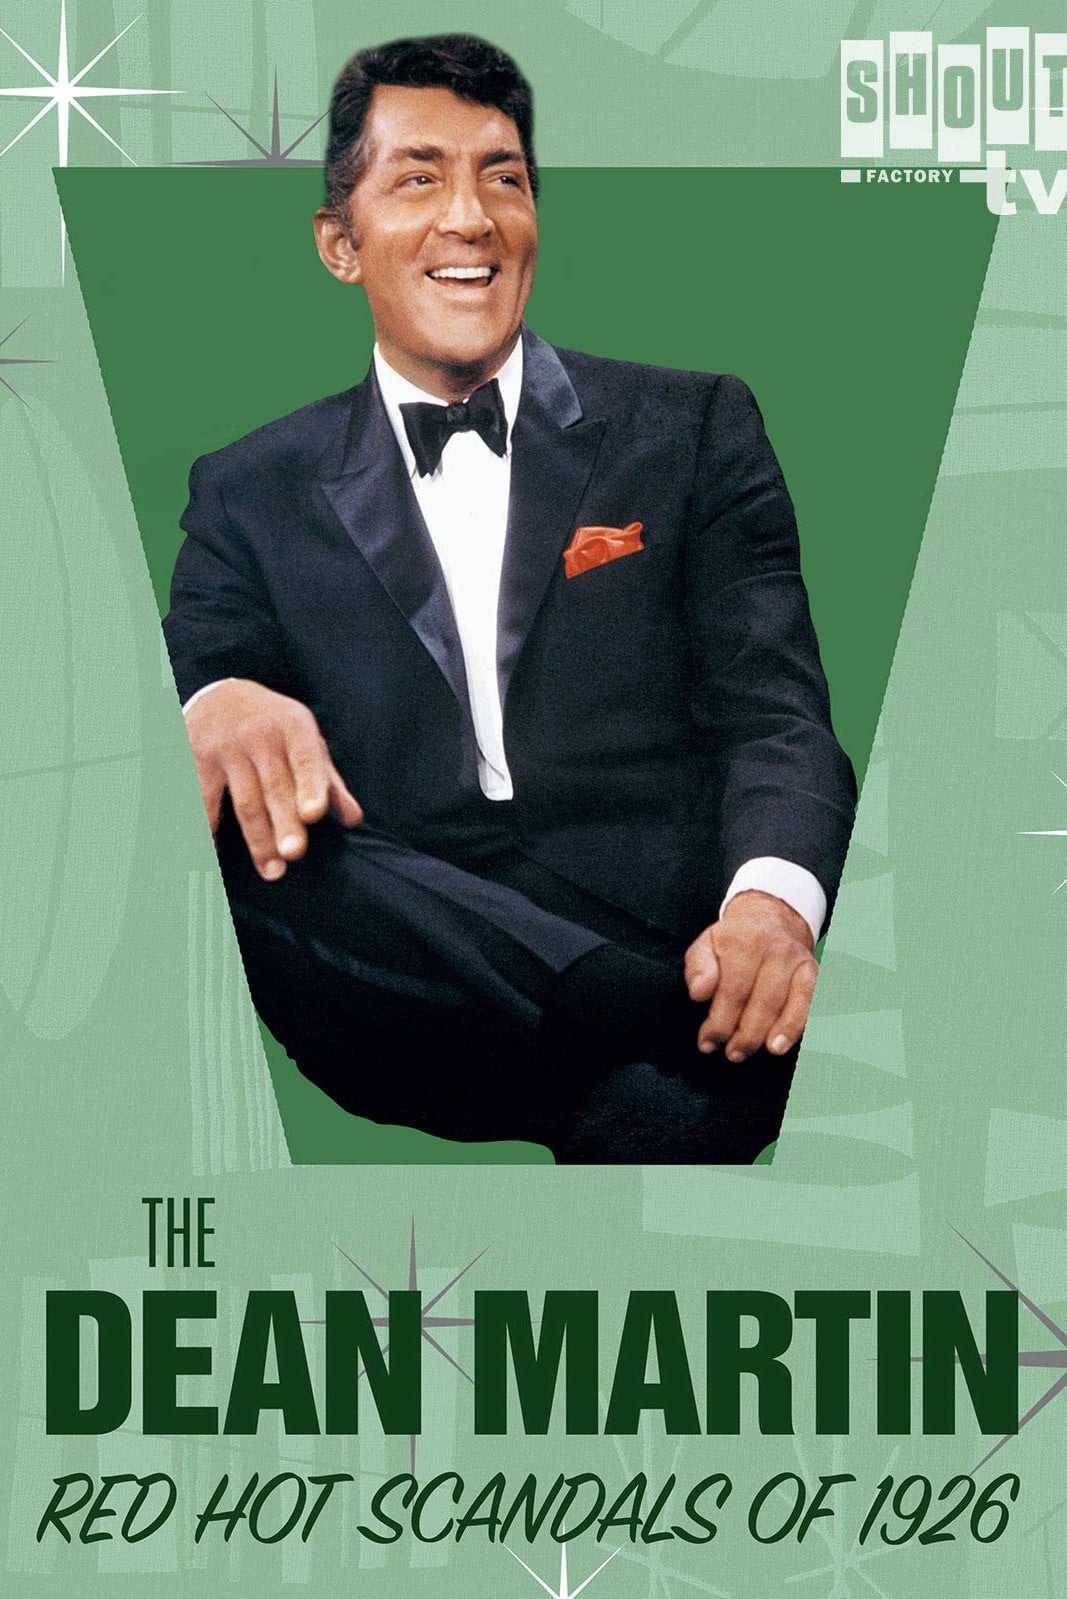 Dean Martin's Red Hot Scandals of 1926 (1976)